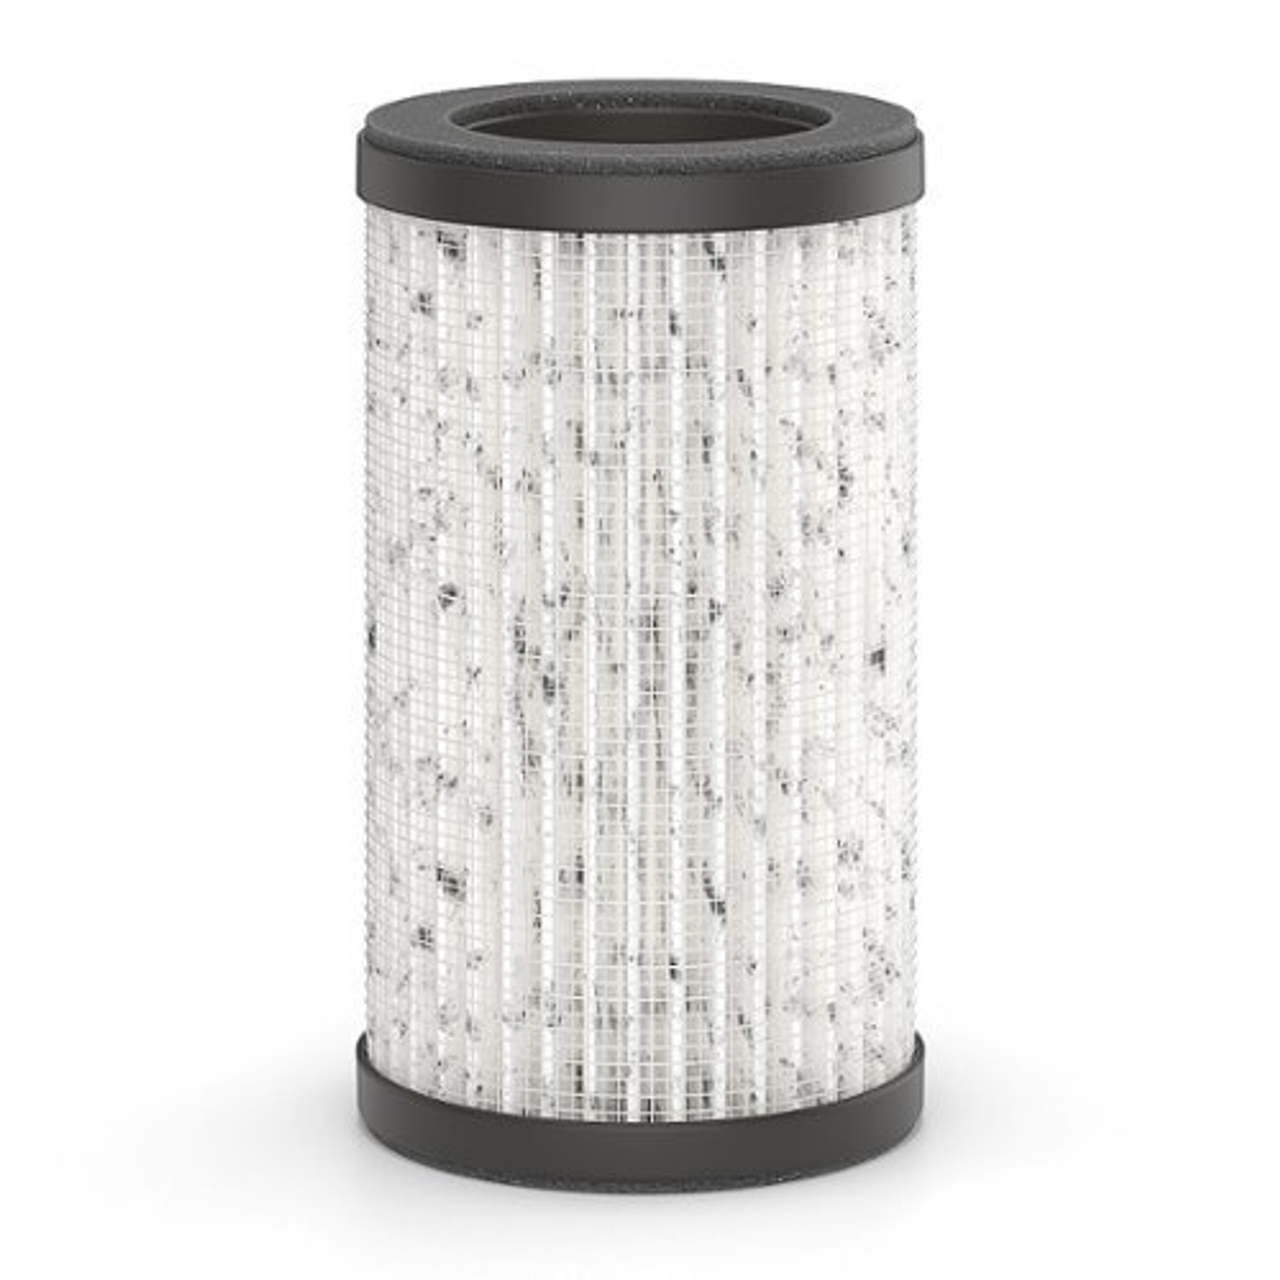 Medify Air - Medify MA-10 Replacement Filter with True HEPA H13 Filter | 40 sq ft Coverage | Black, 1-Pack - Silver